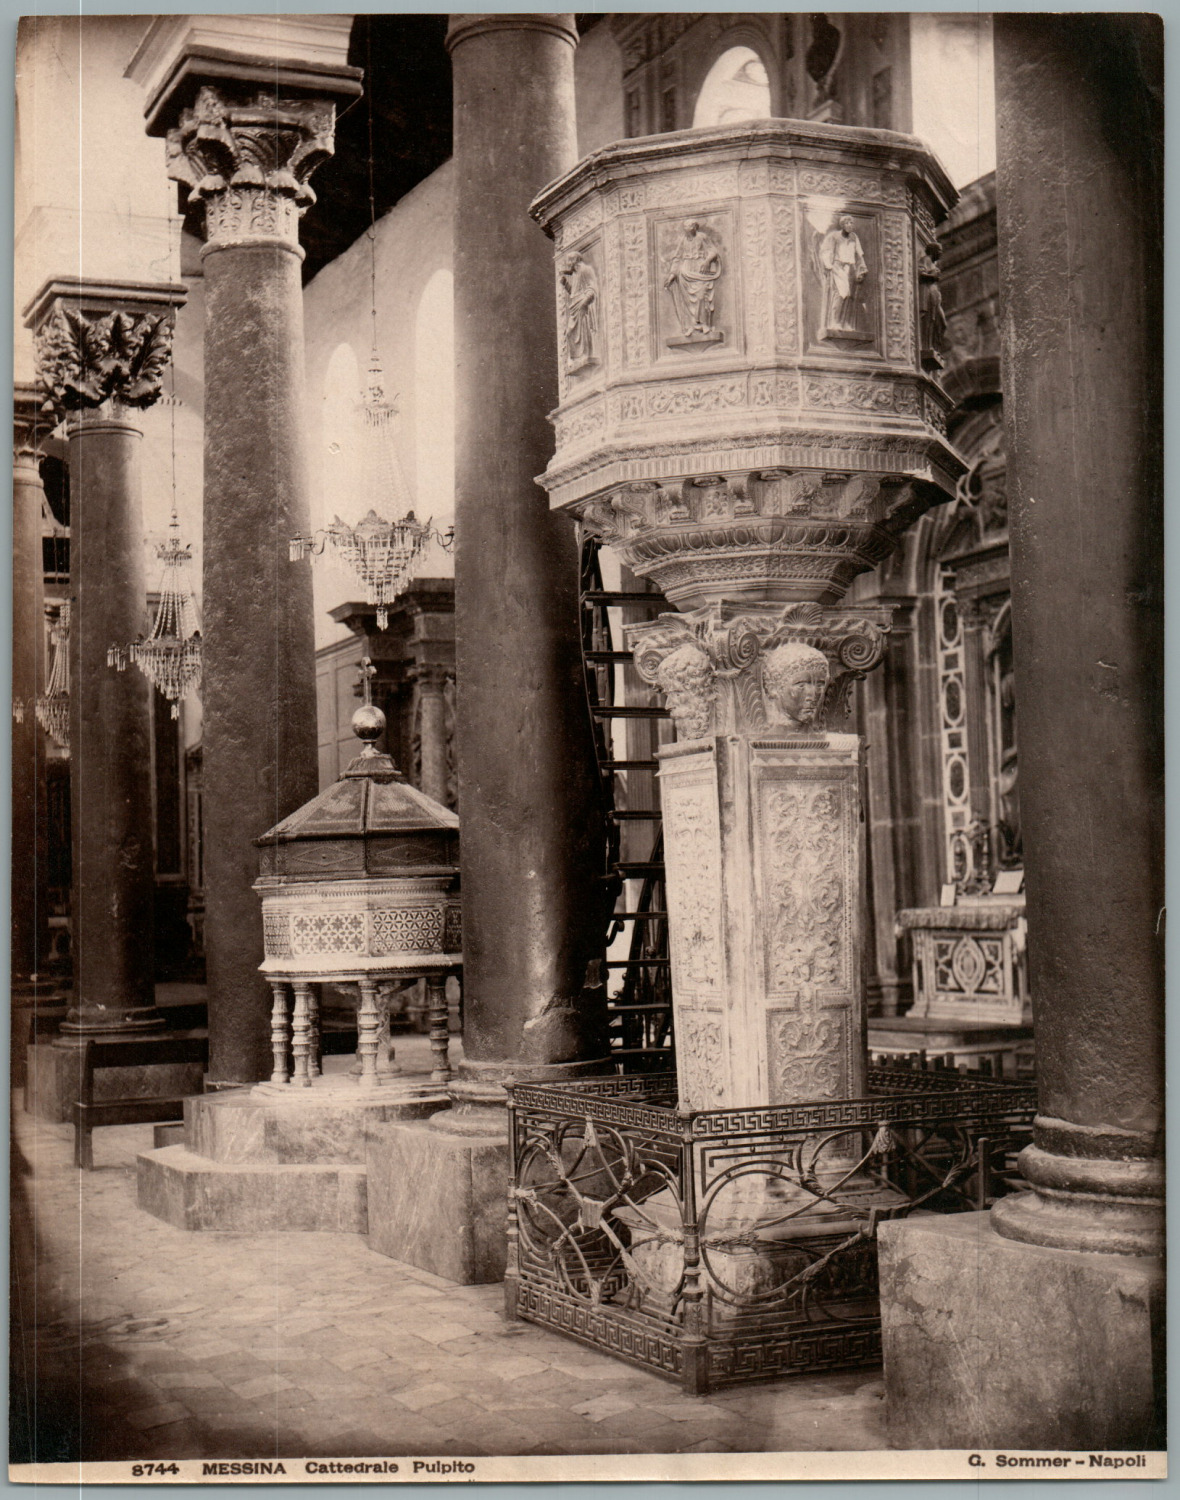 G. Sommer, Italy, Messina, Cathedral Pulpito Vintage Albumen Print.  Print